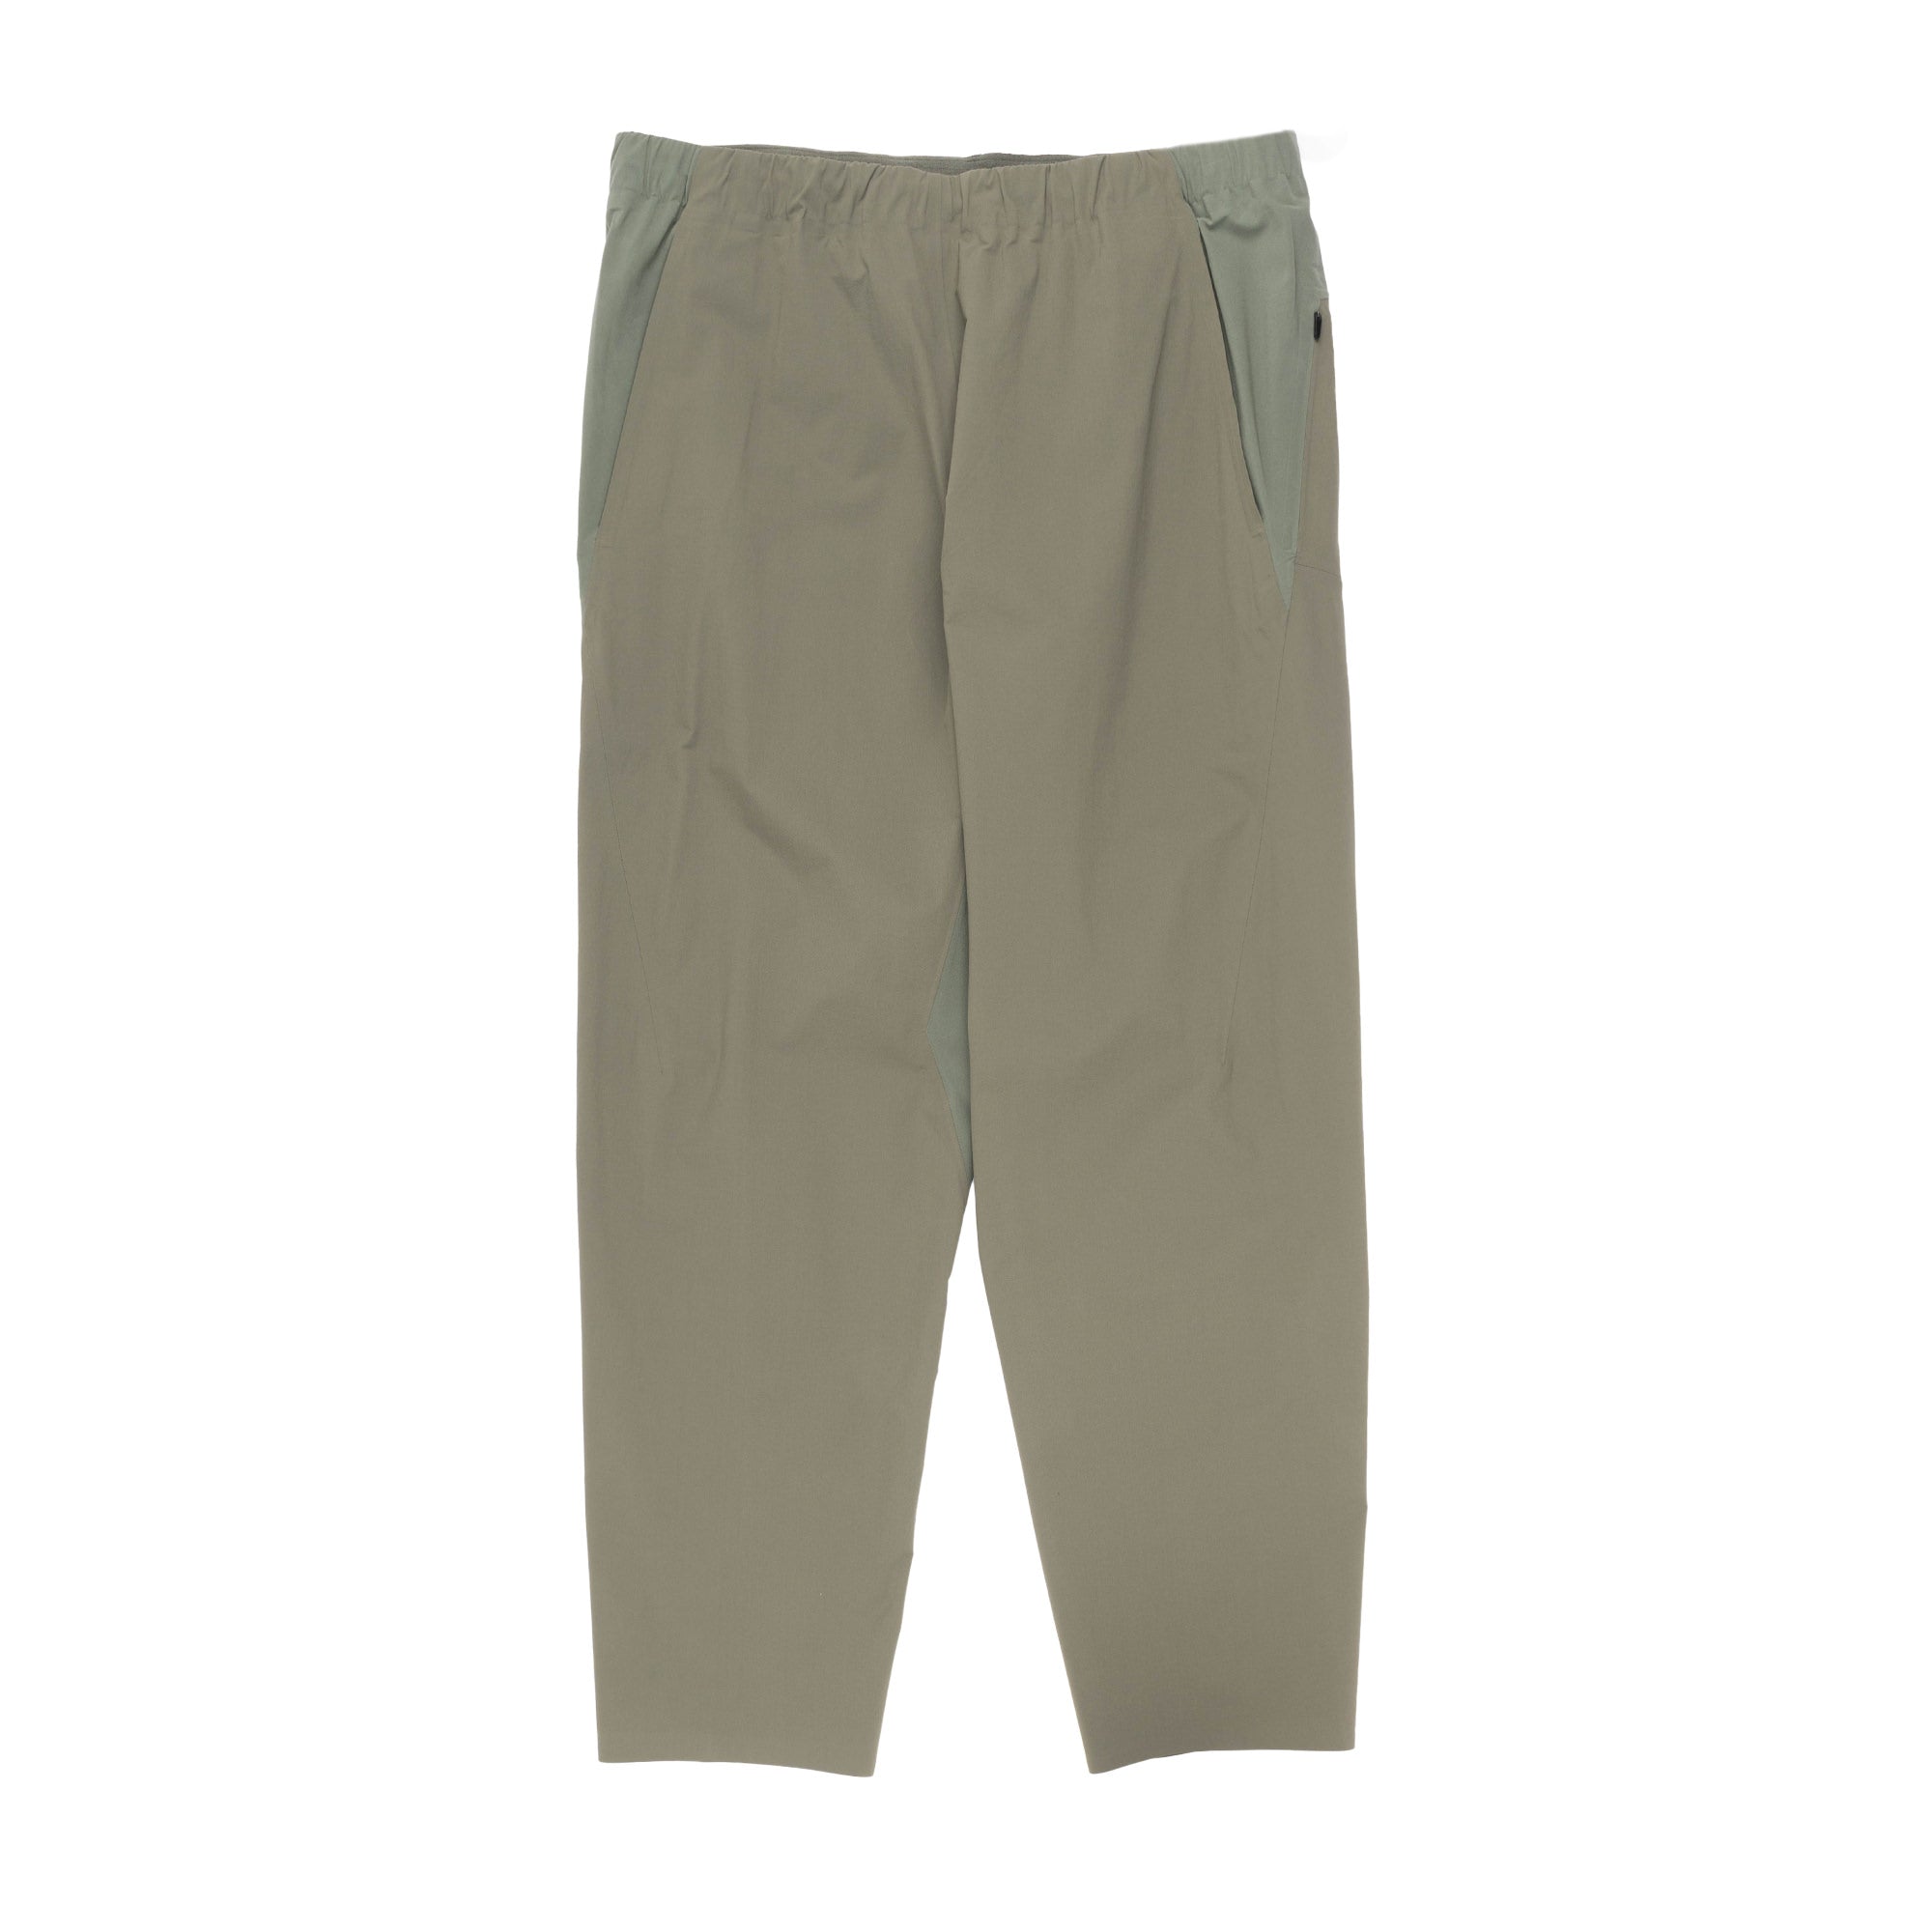 Clothing & Shoes - Bottoms - Pants - Mr. Max Luxe Vortex Ponte Pant -  Online Shopping for Canadians